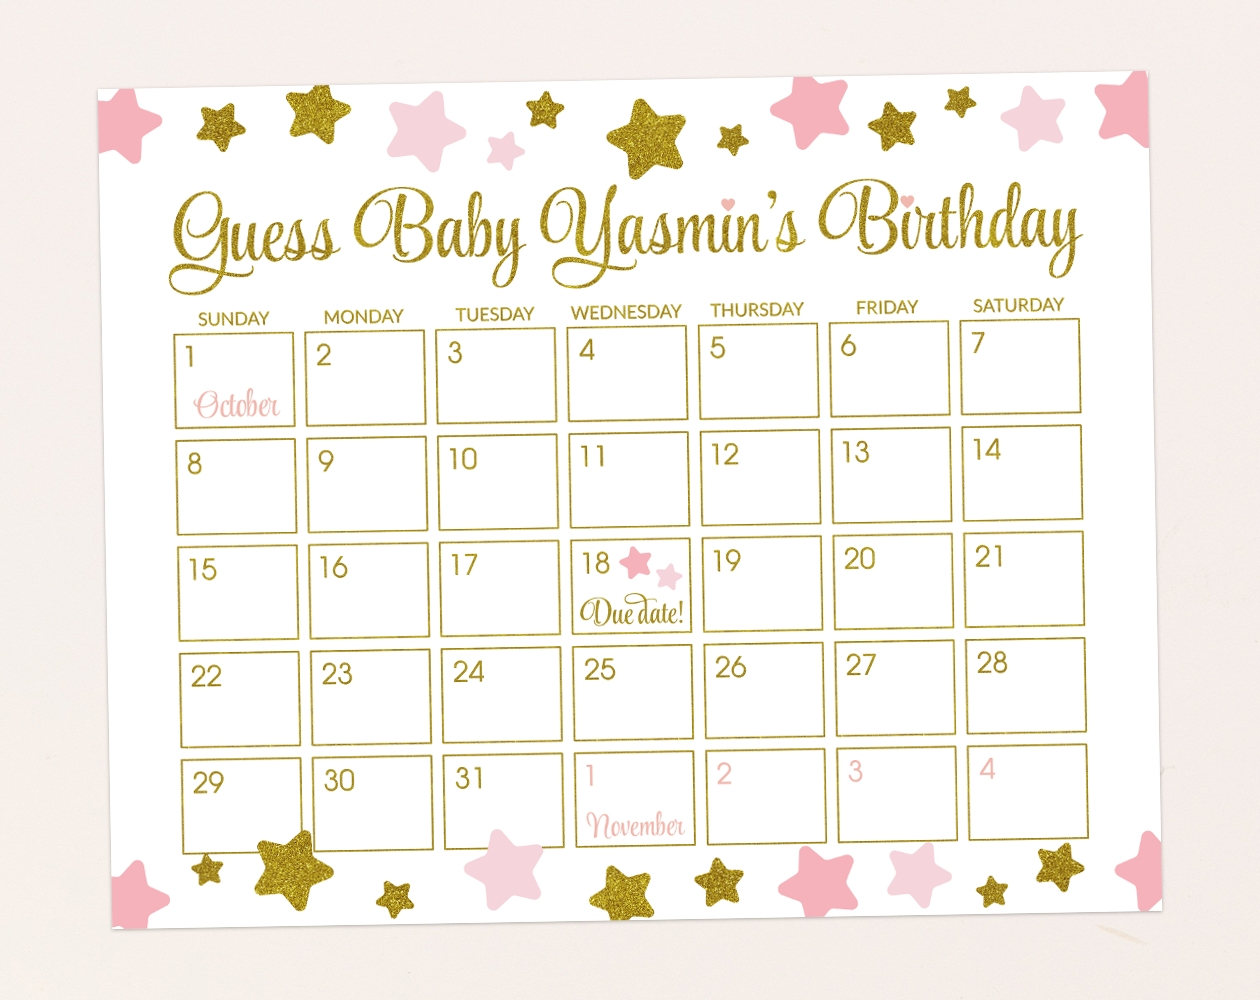 Guess The Date Babyparty | Calendar Template 2020-August 2021 Free Printable Baby Due Date Calendar